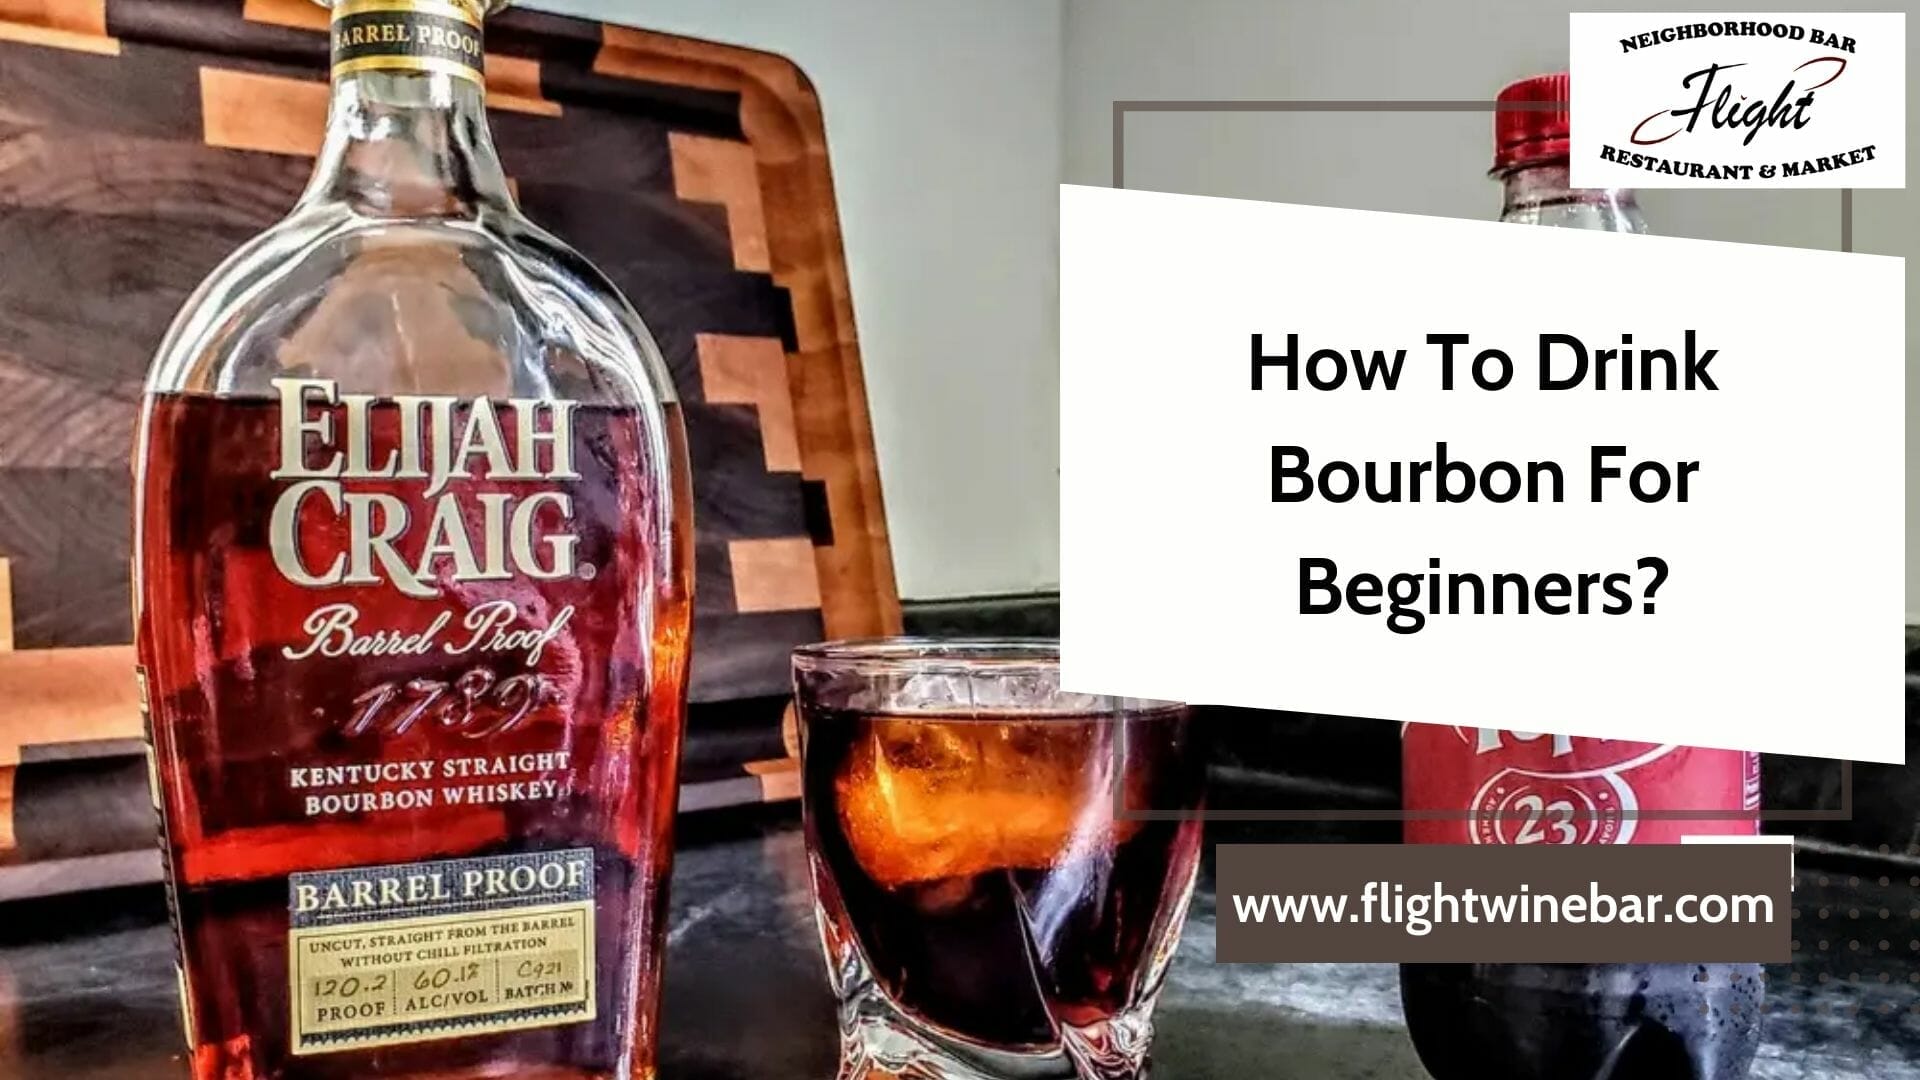 How To Drink Bourbon For Beginners